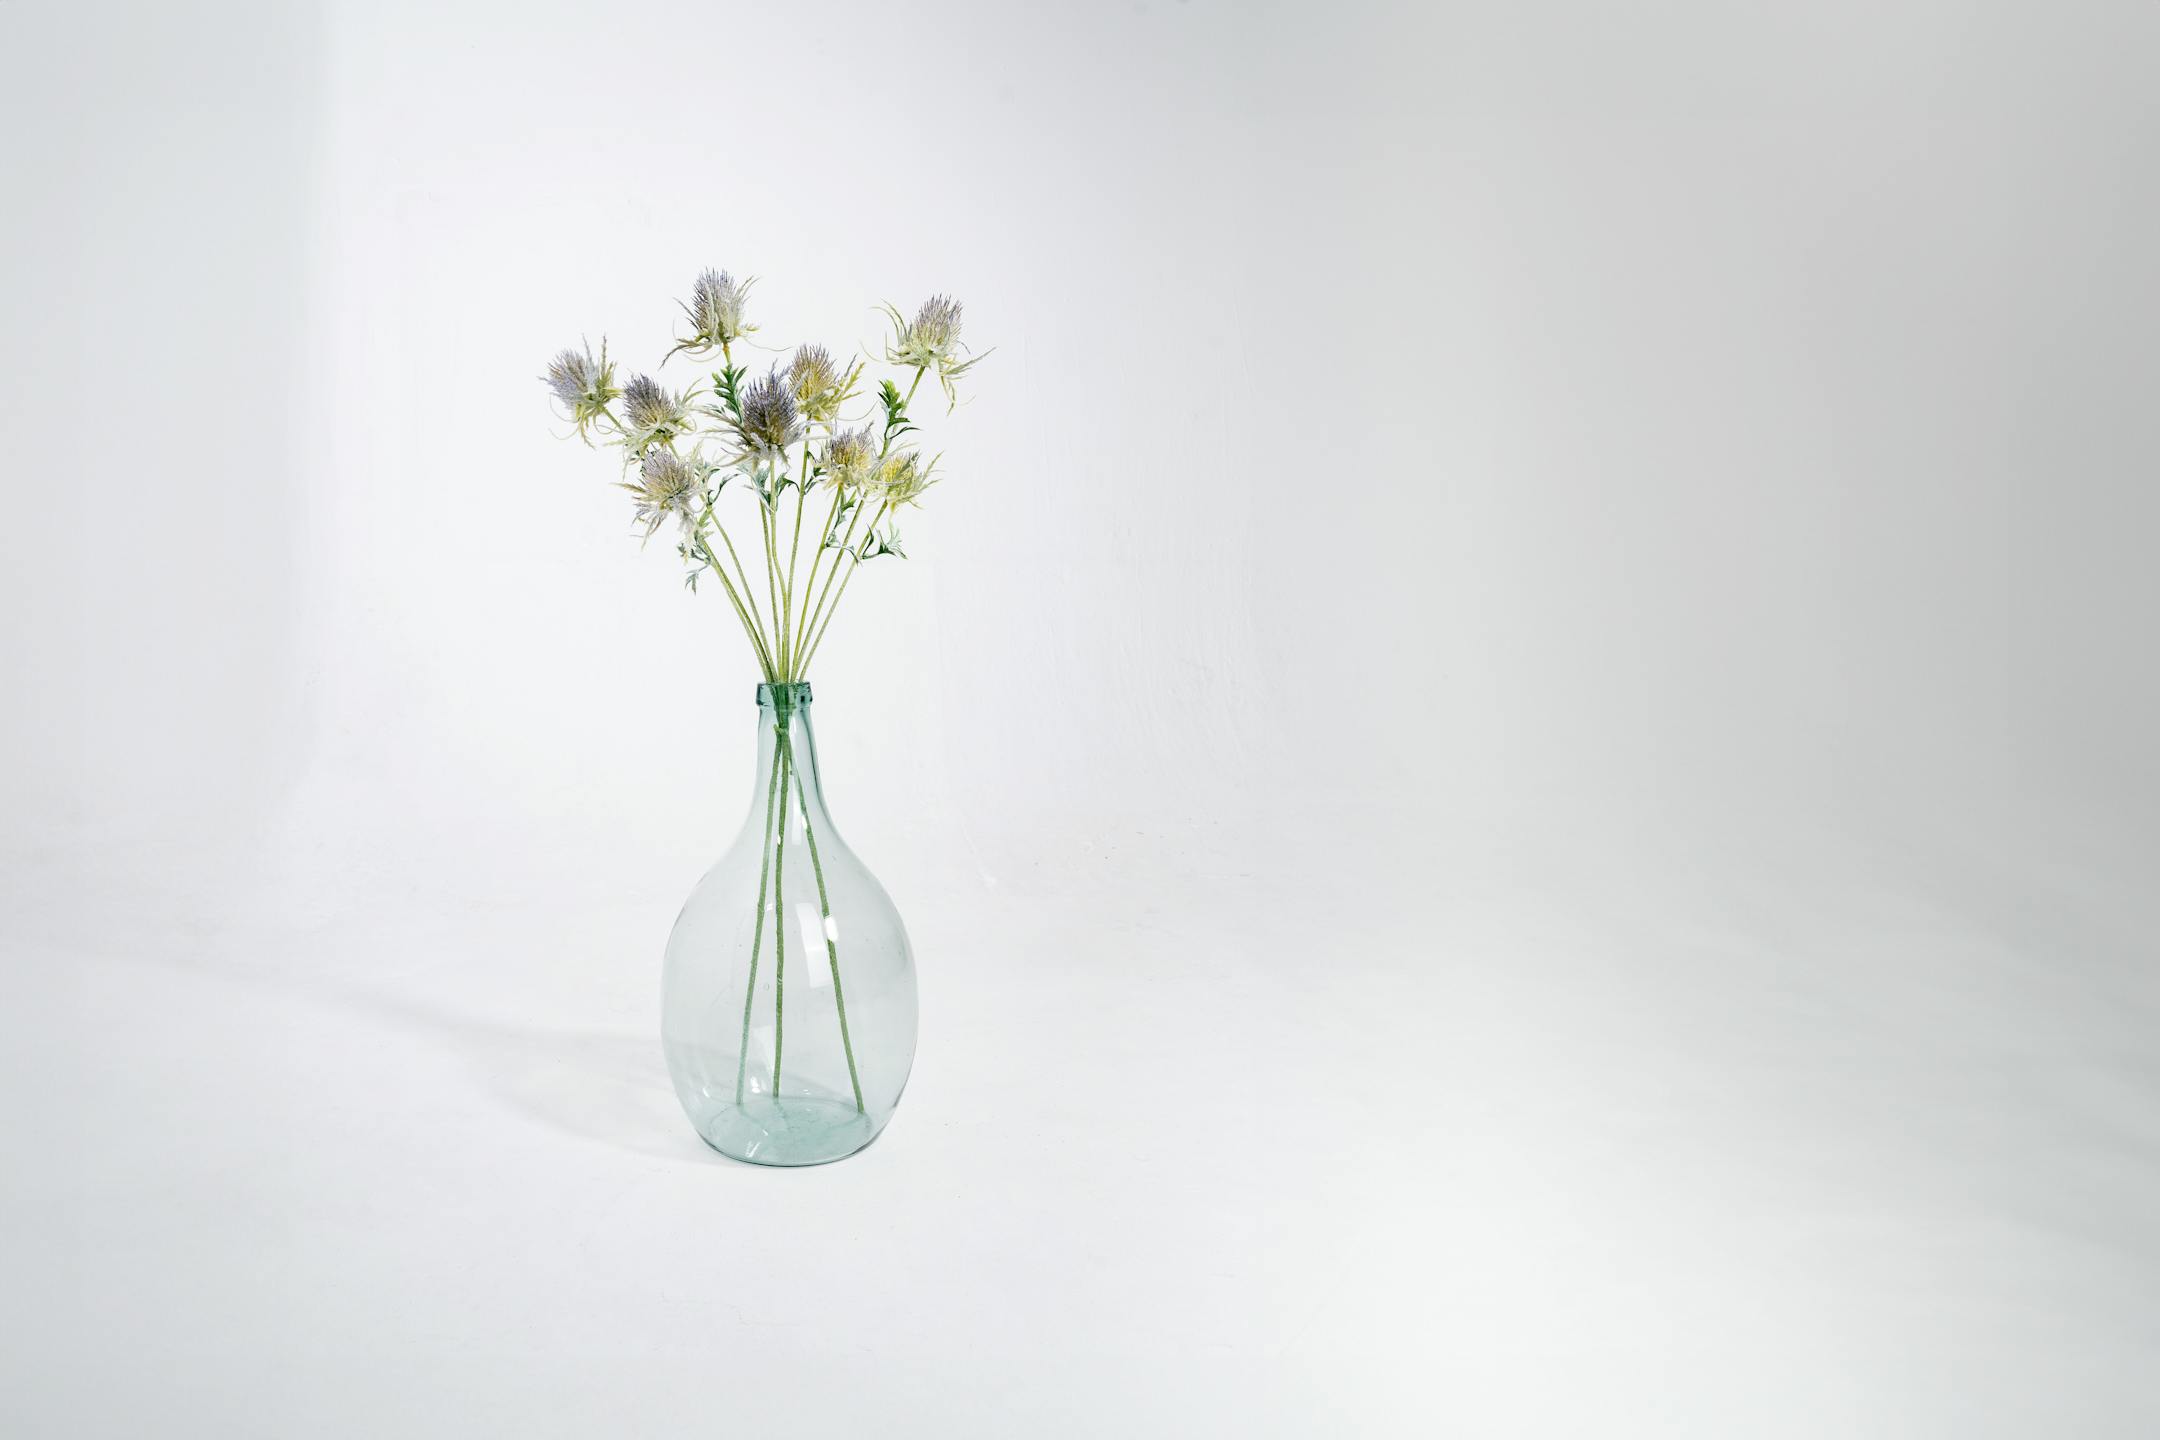 Three artificial thistle stems in glass vase